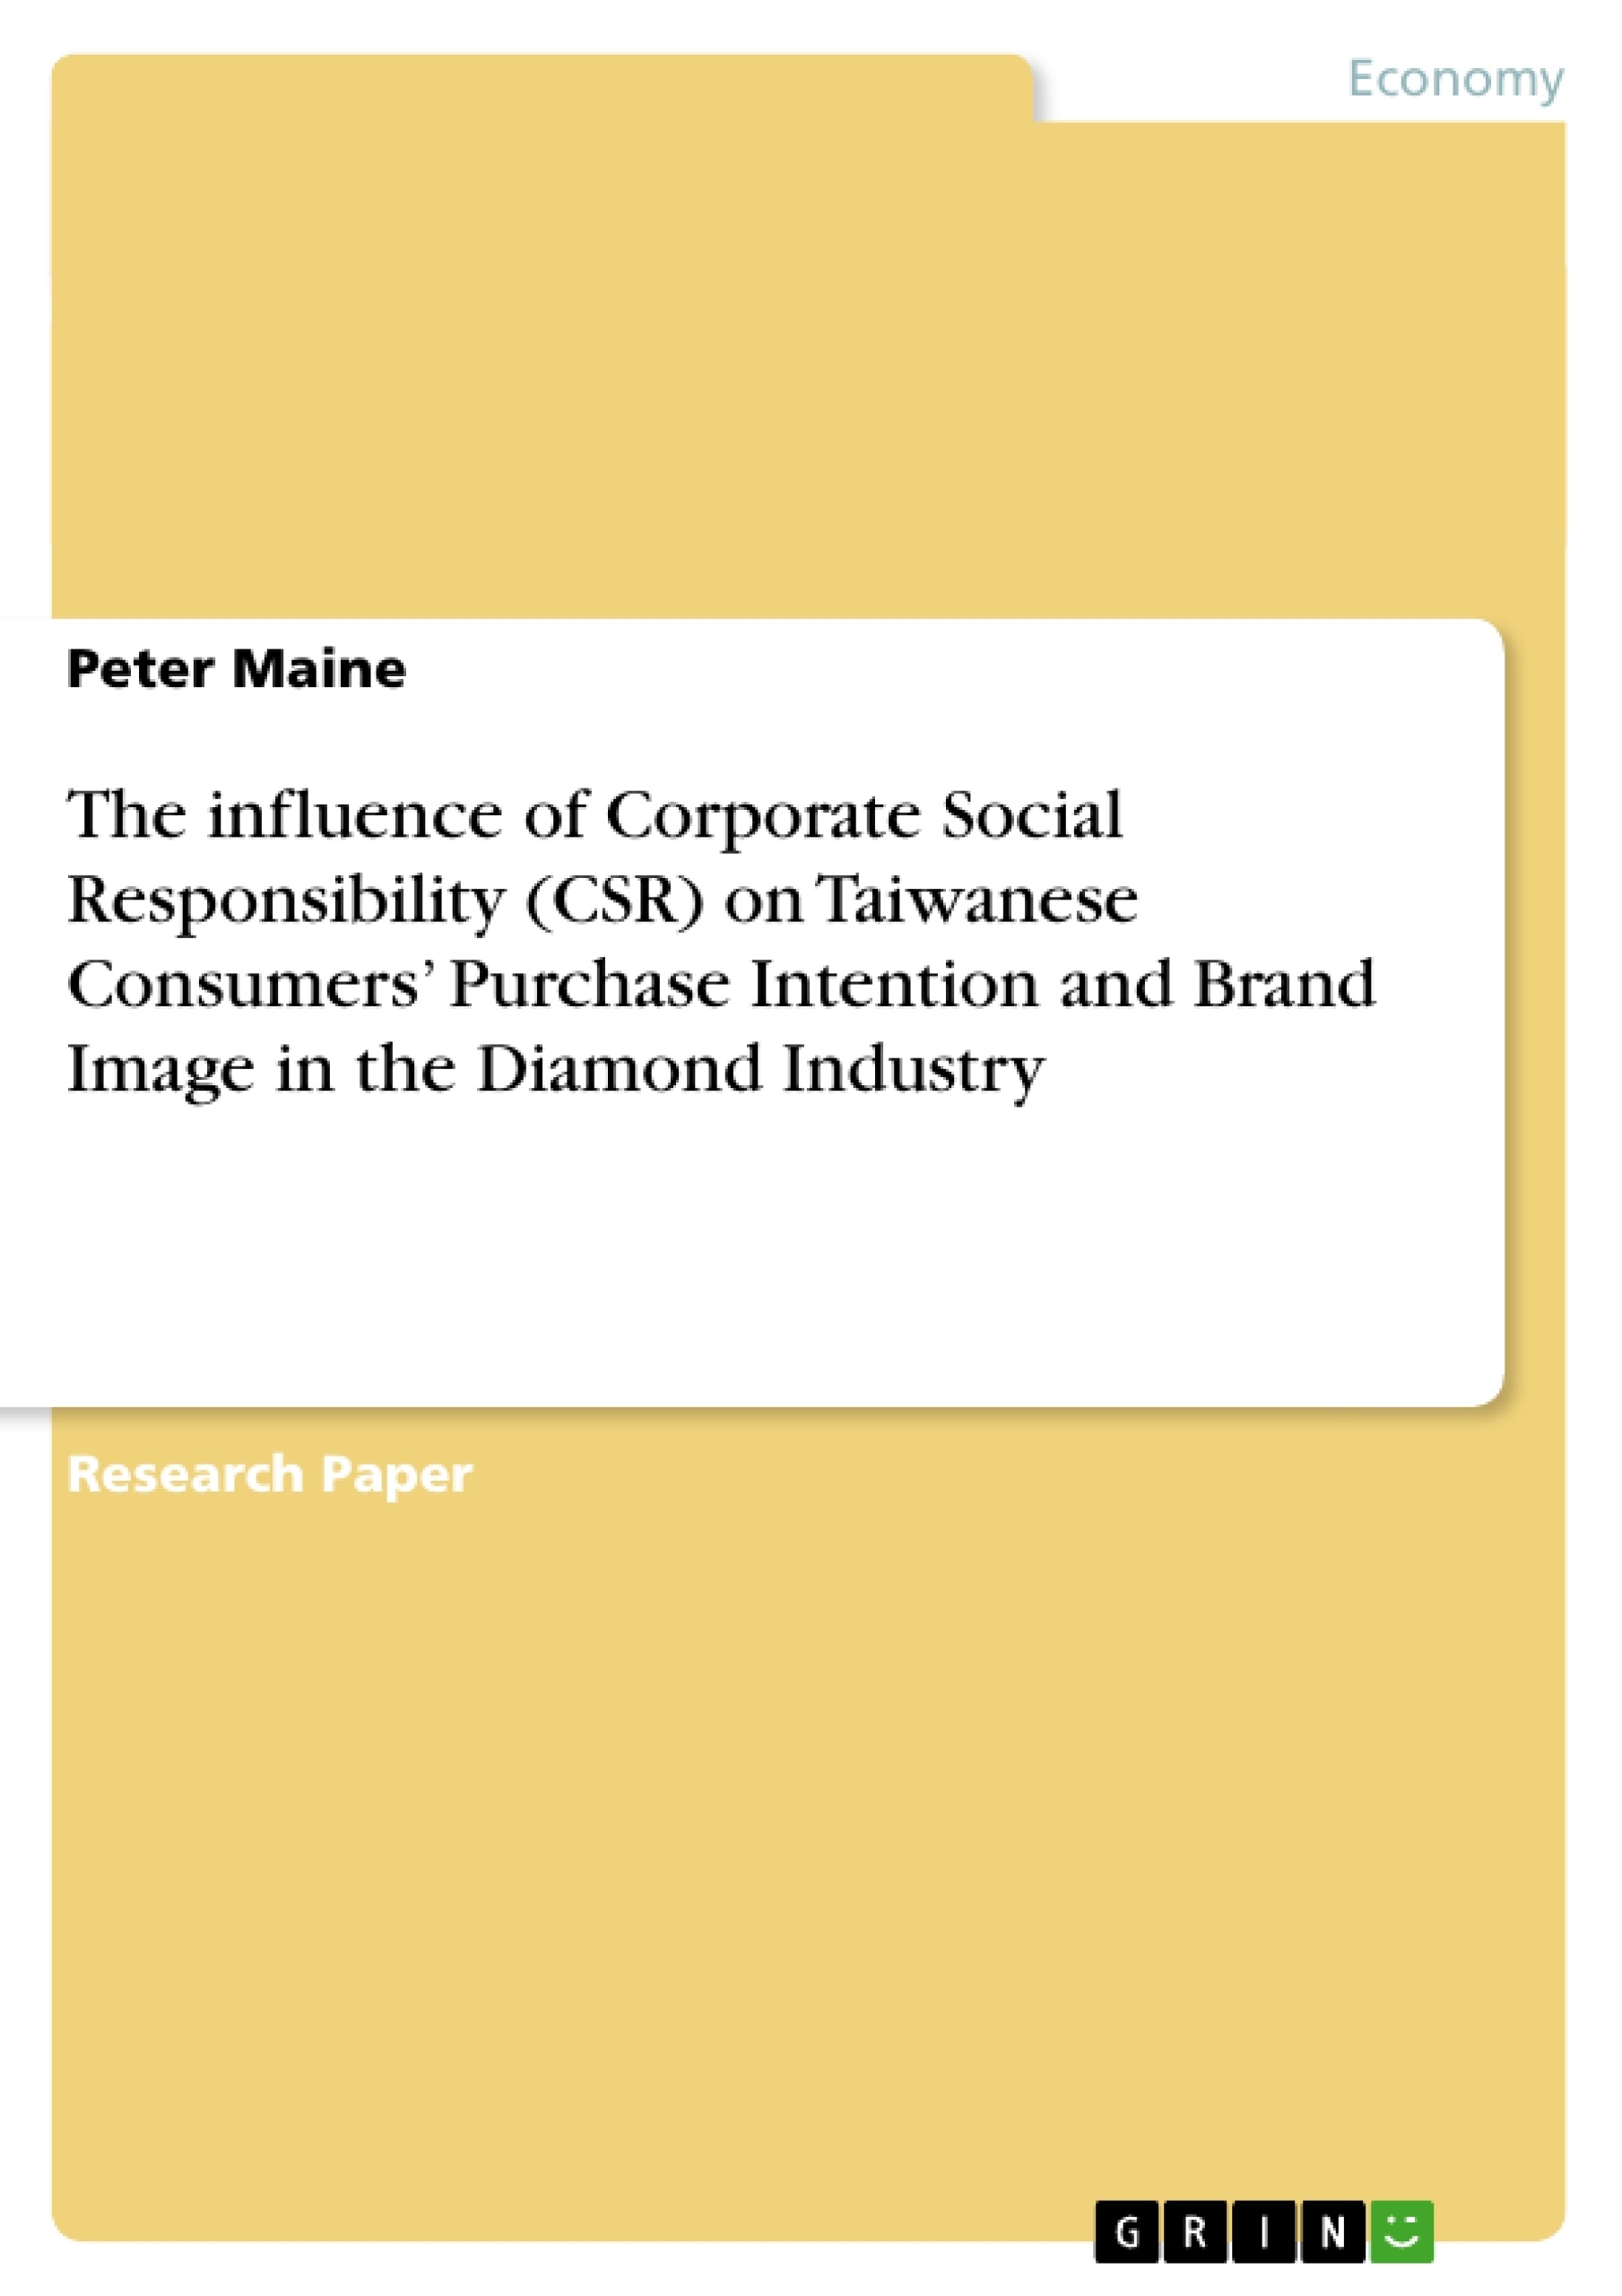 research papers on csr in